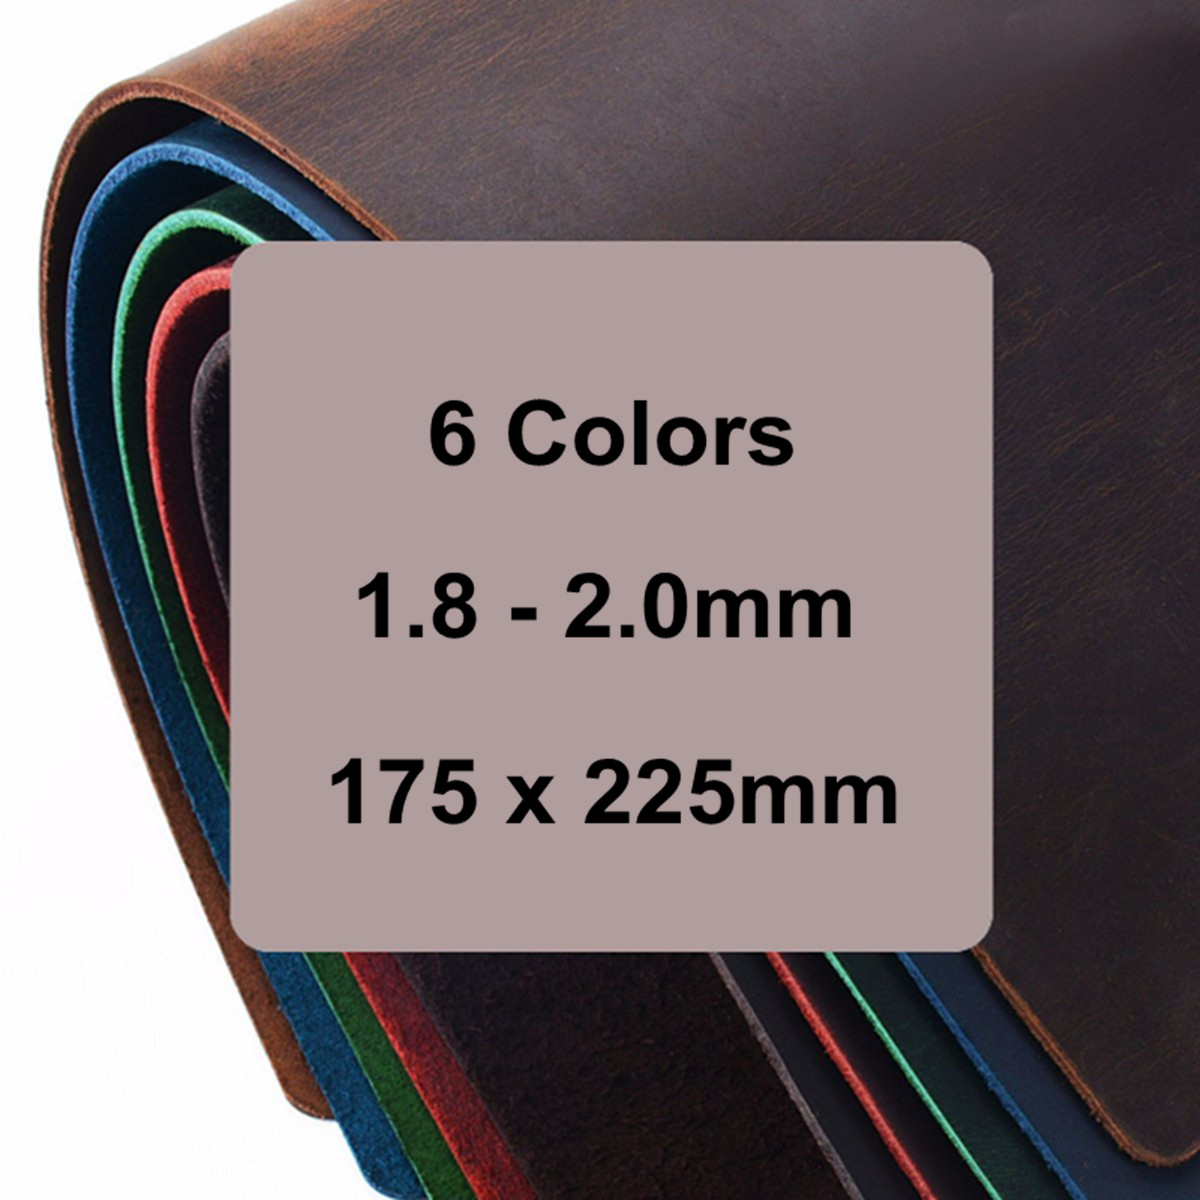 175225mm-Vintage-18-2mm-Thick-Hide-Cowhide-Leather-for-Wallet-Bag-Notebooks-Crafts-1634559-4